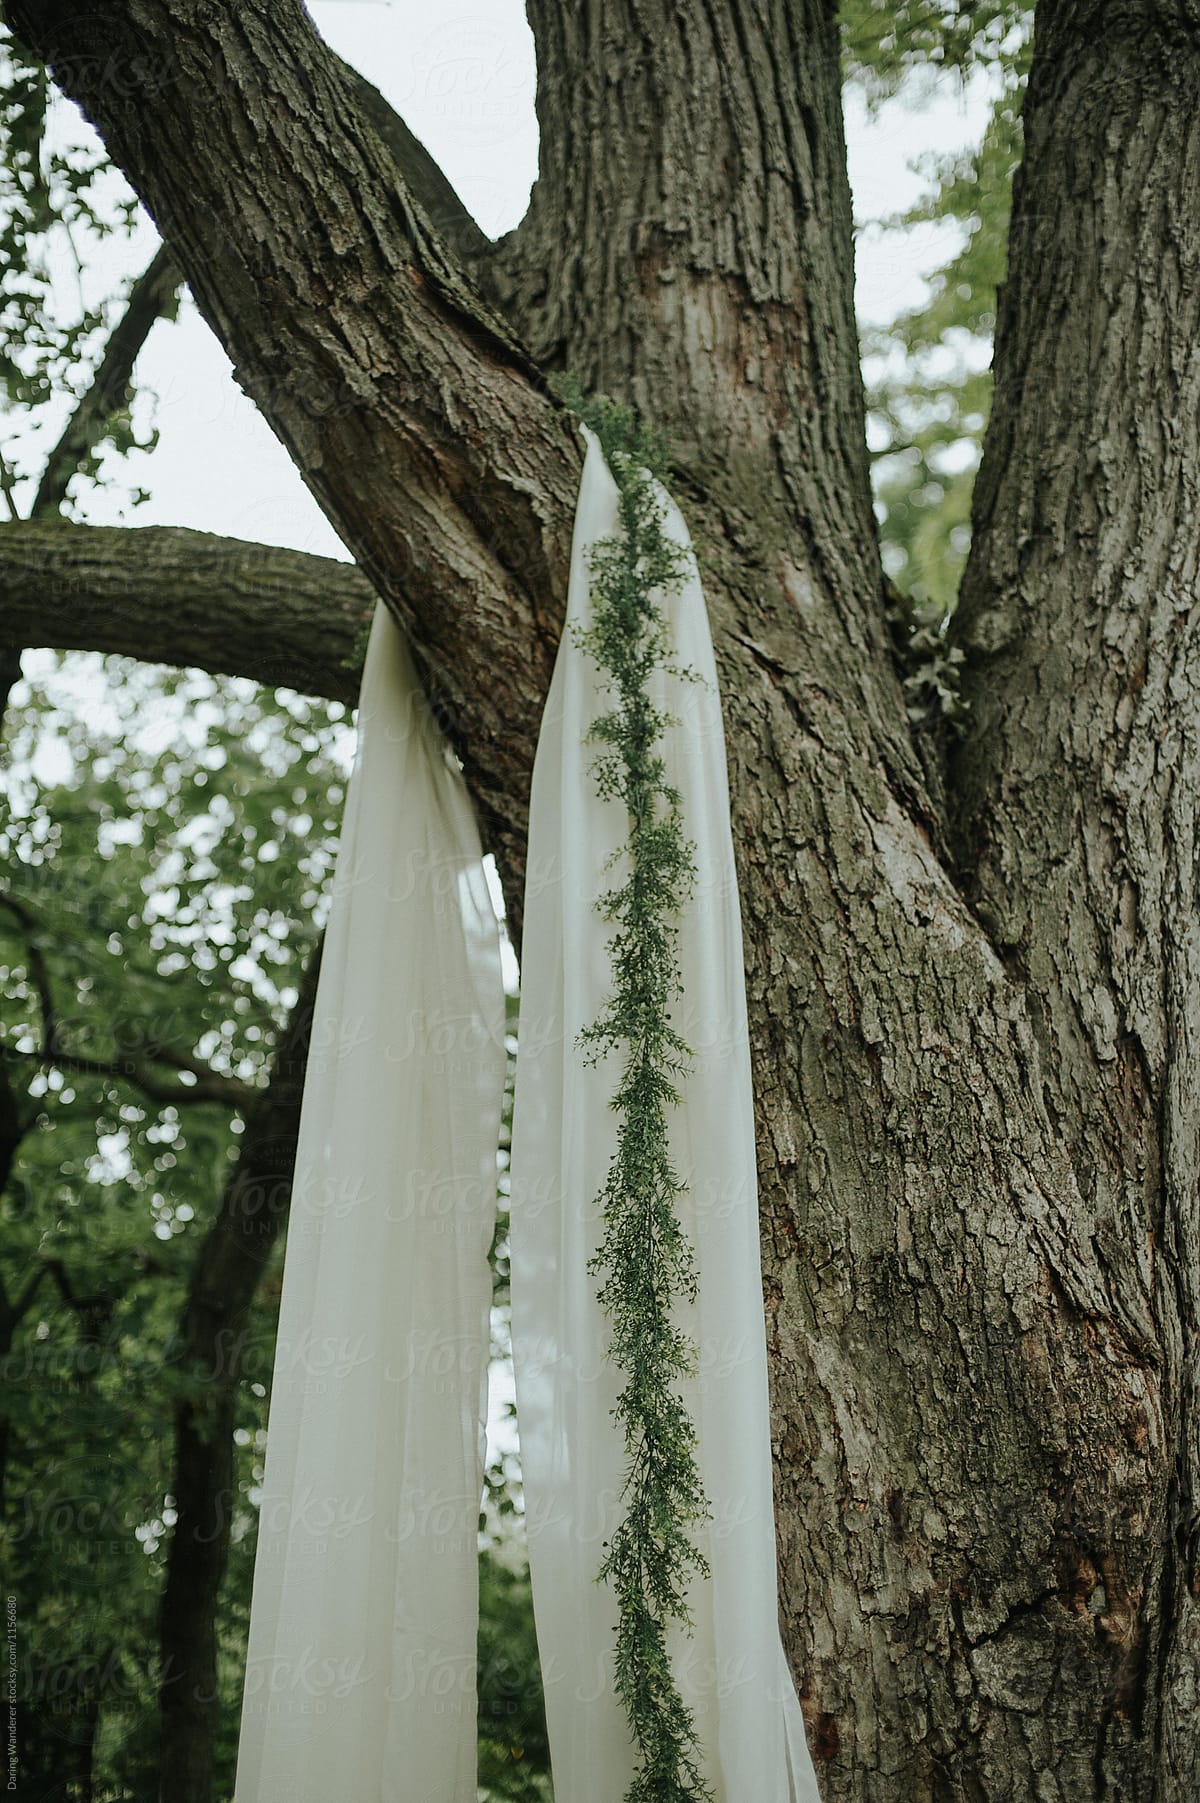 Sheer drapes and greenery vine details for ceremony backdrop at garden wedding